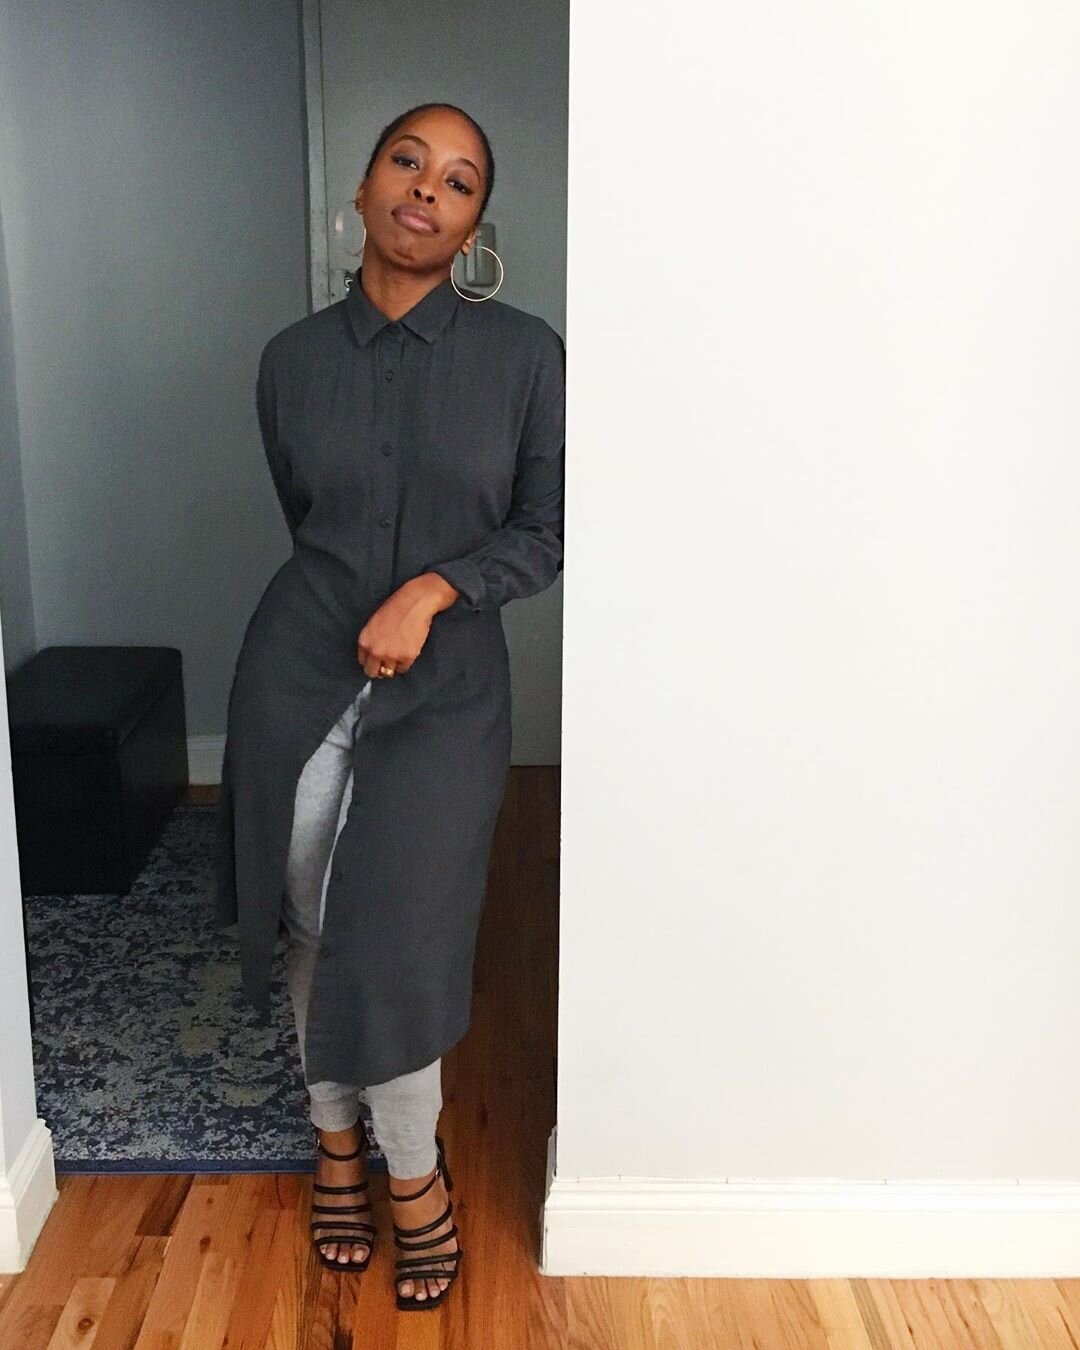   Shirt Dress + Sweatpants: Uniqlo | Shoes: Nine West      UNIQLO on the top and bottom because they’re my go-to for all of my comfy faves. I discovered their sweatpants right after moving to the city five years ago and copping a new pair is still th